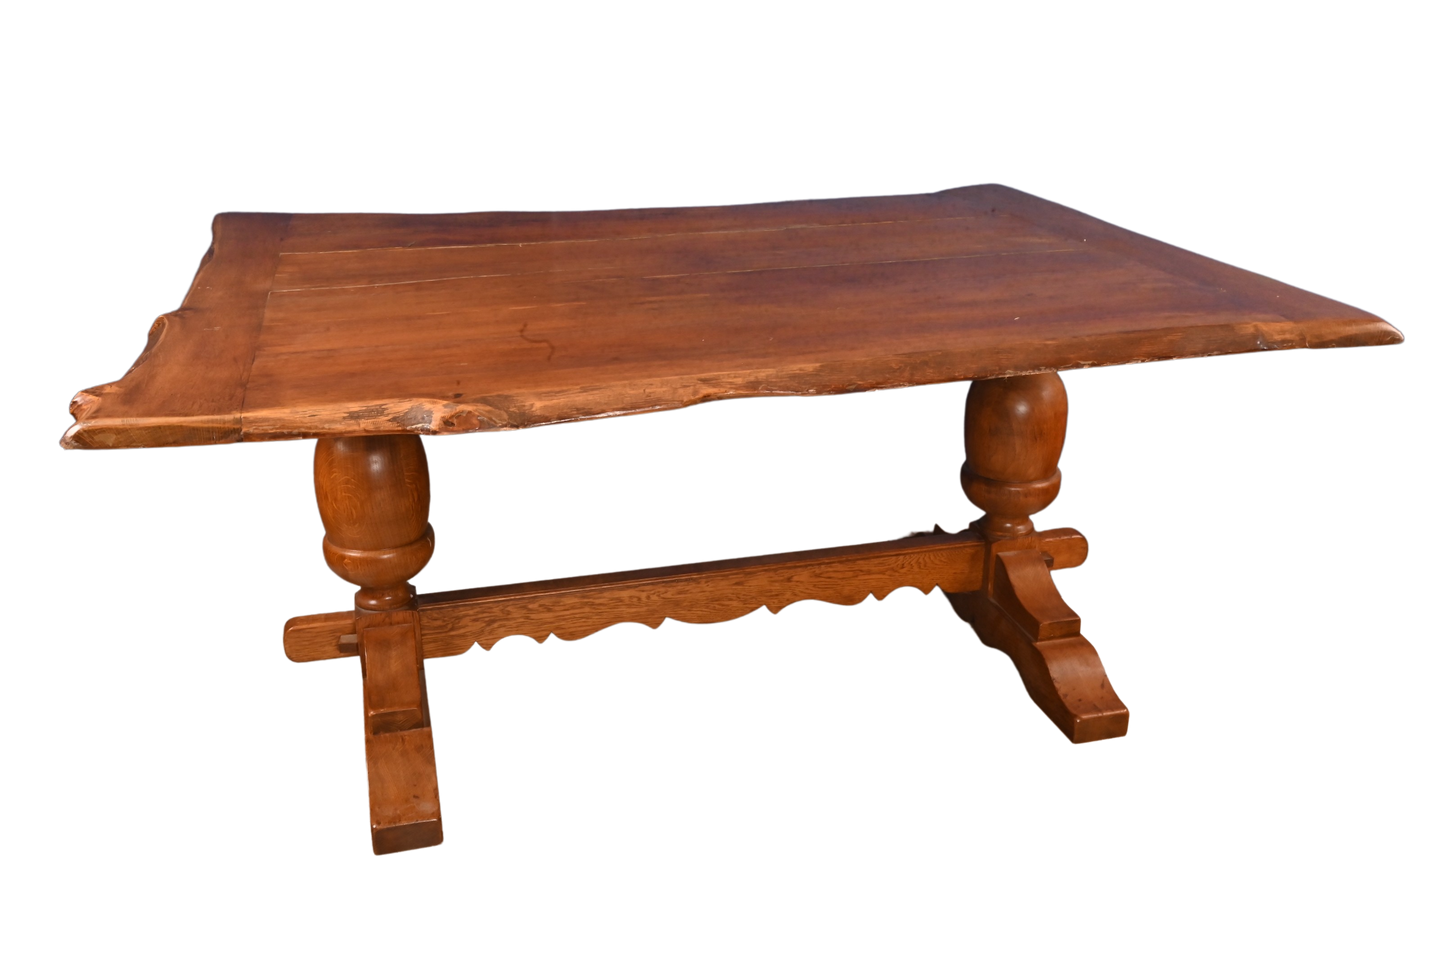 Solid English Live Edge Oak Table - The Barn Antiques